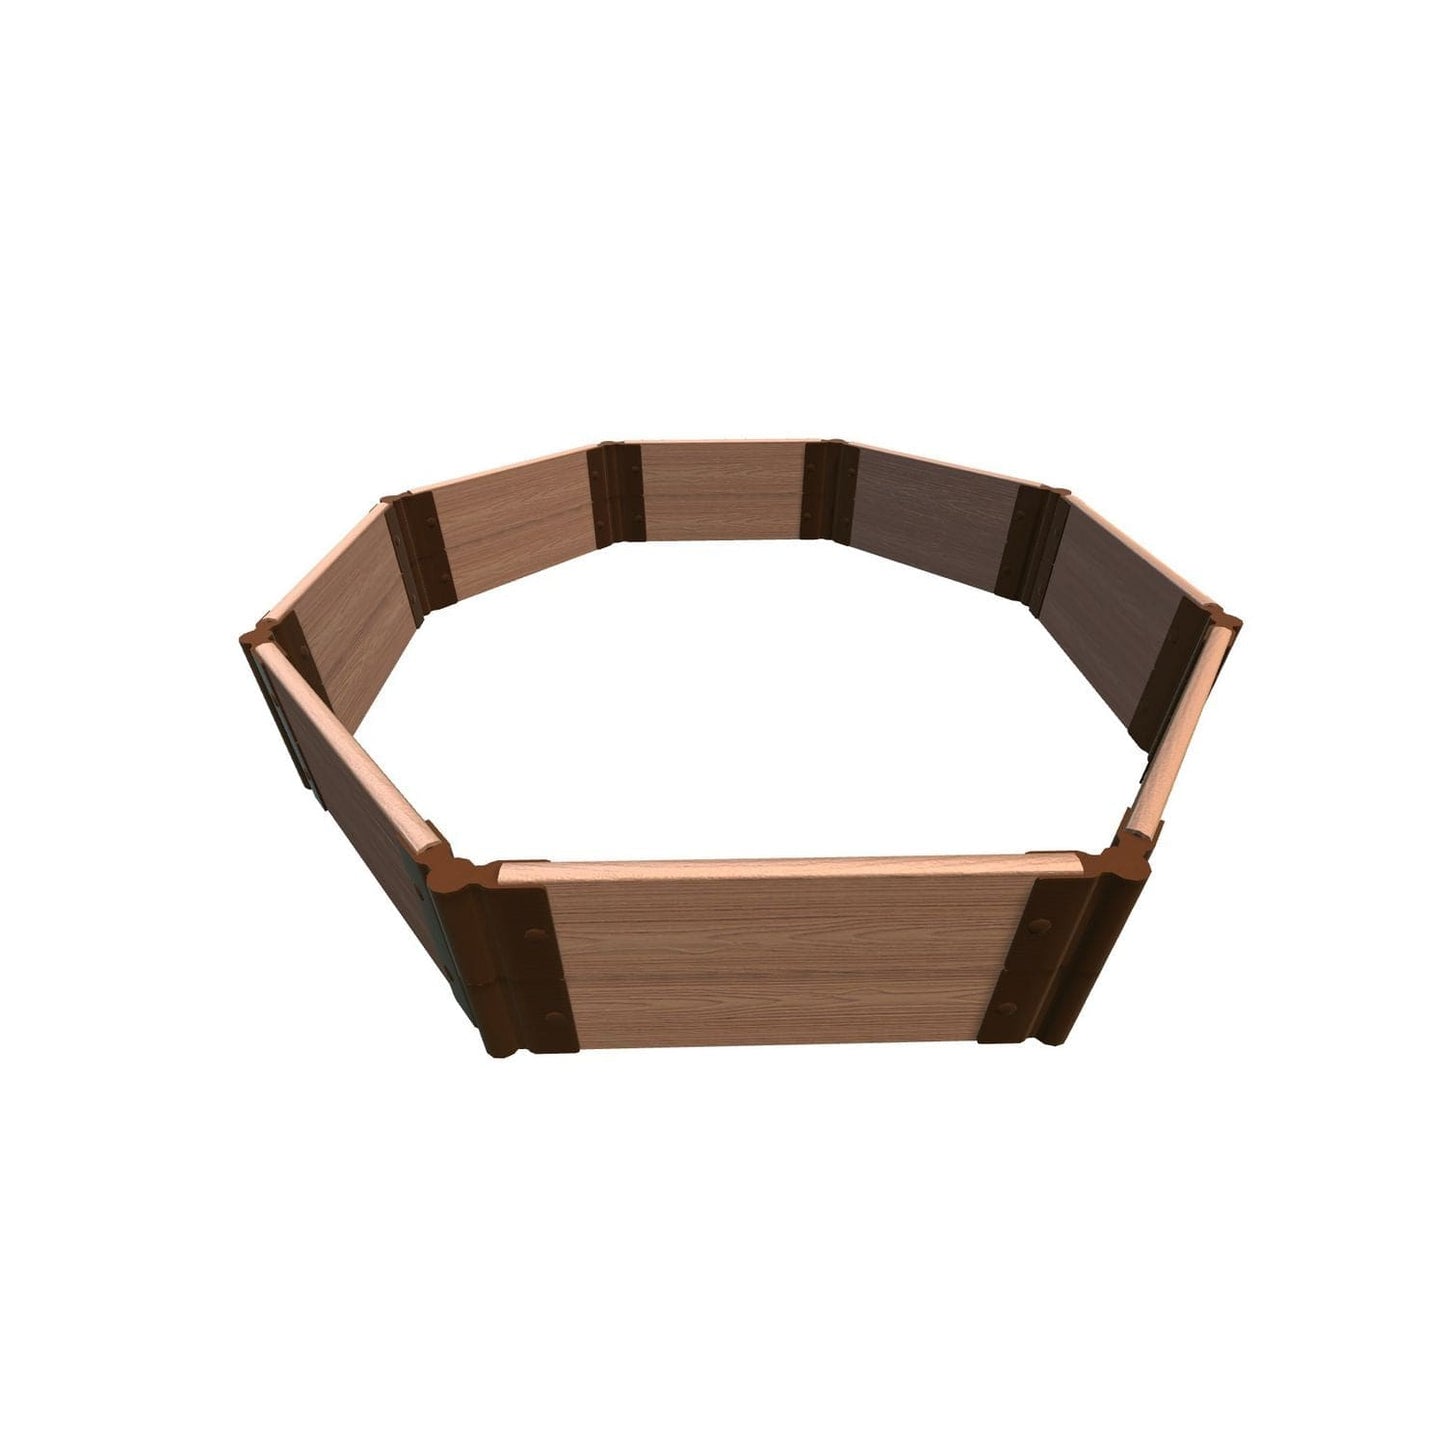 Frame It All Gardening Accessories Frame It All | Tool-Free St. John Baptistry Raised Garden Bed (Octagon) 5' X 5' X 11" - Classic Sienna - 1" Profile 200002459